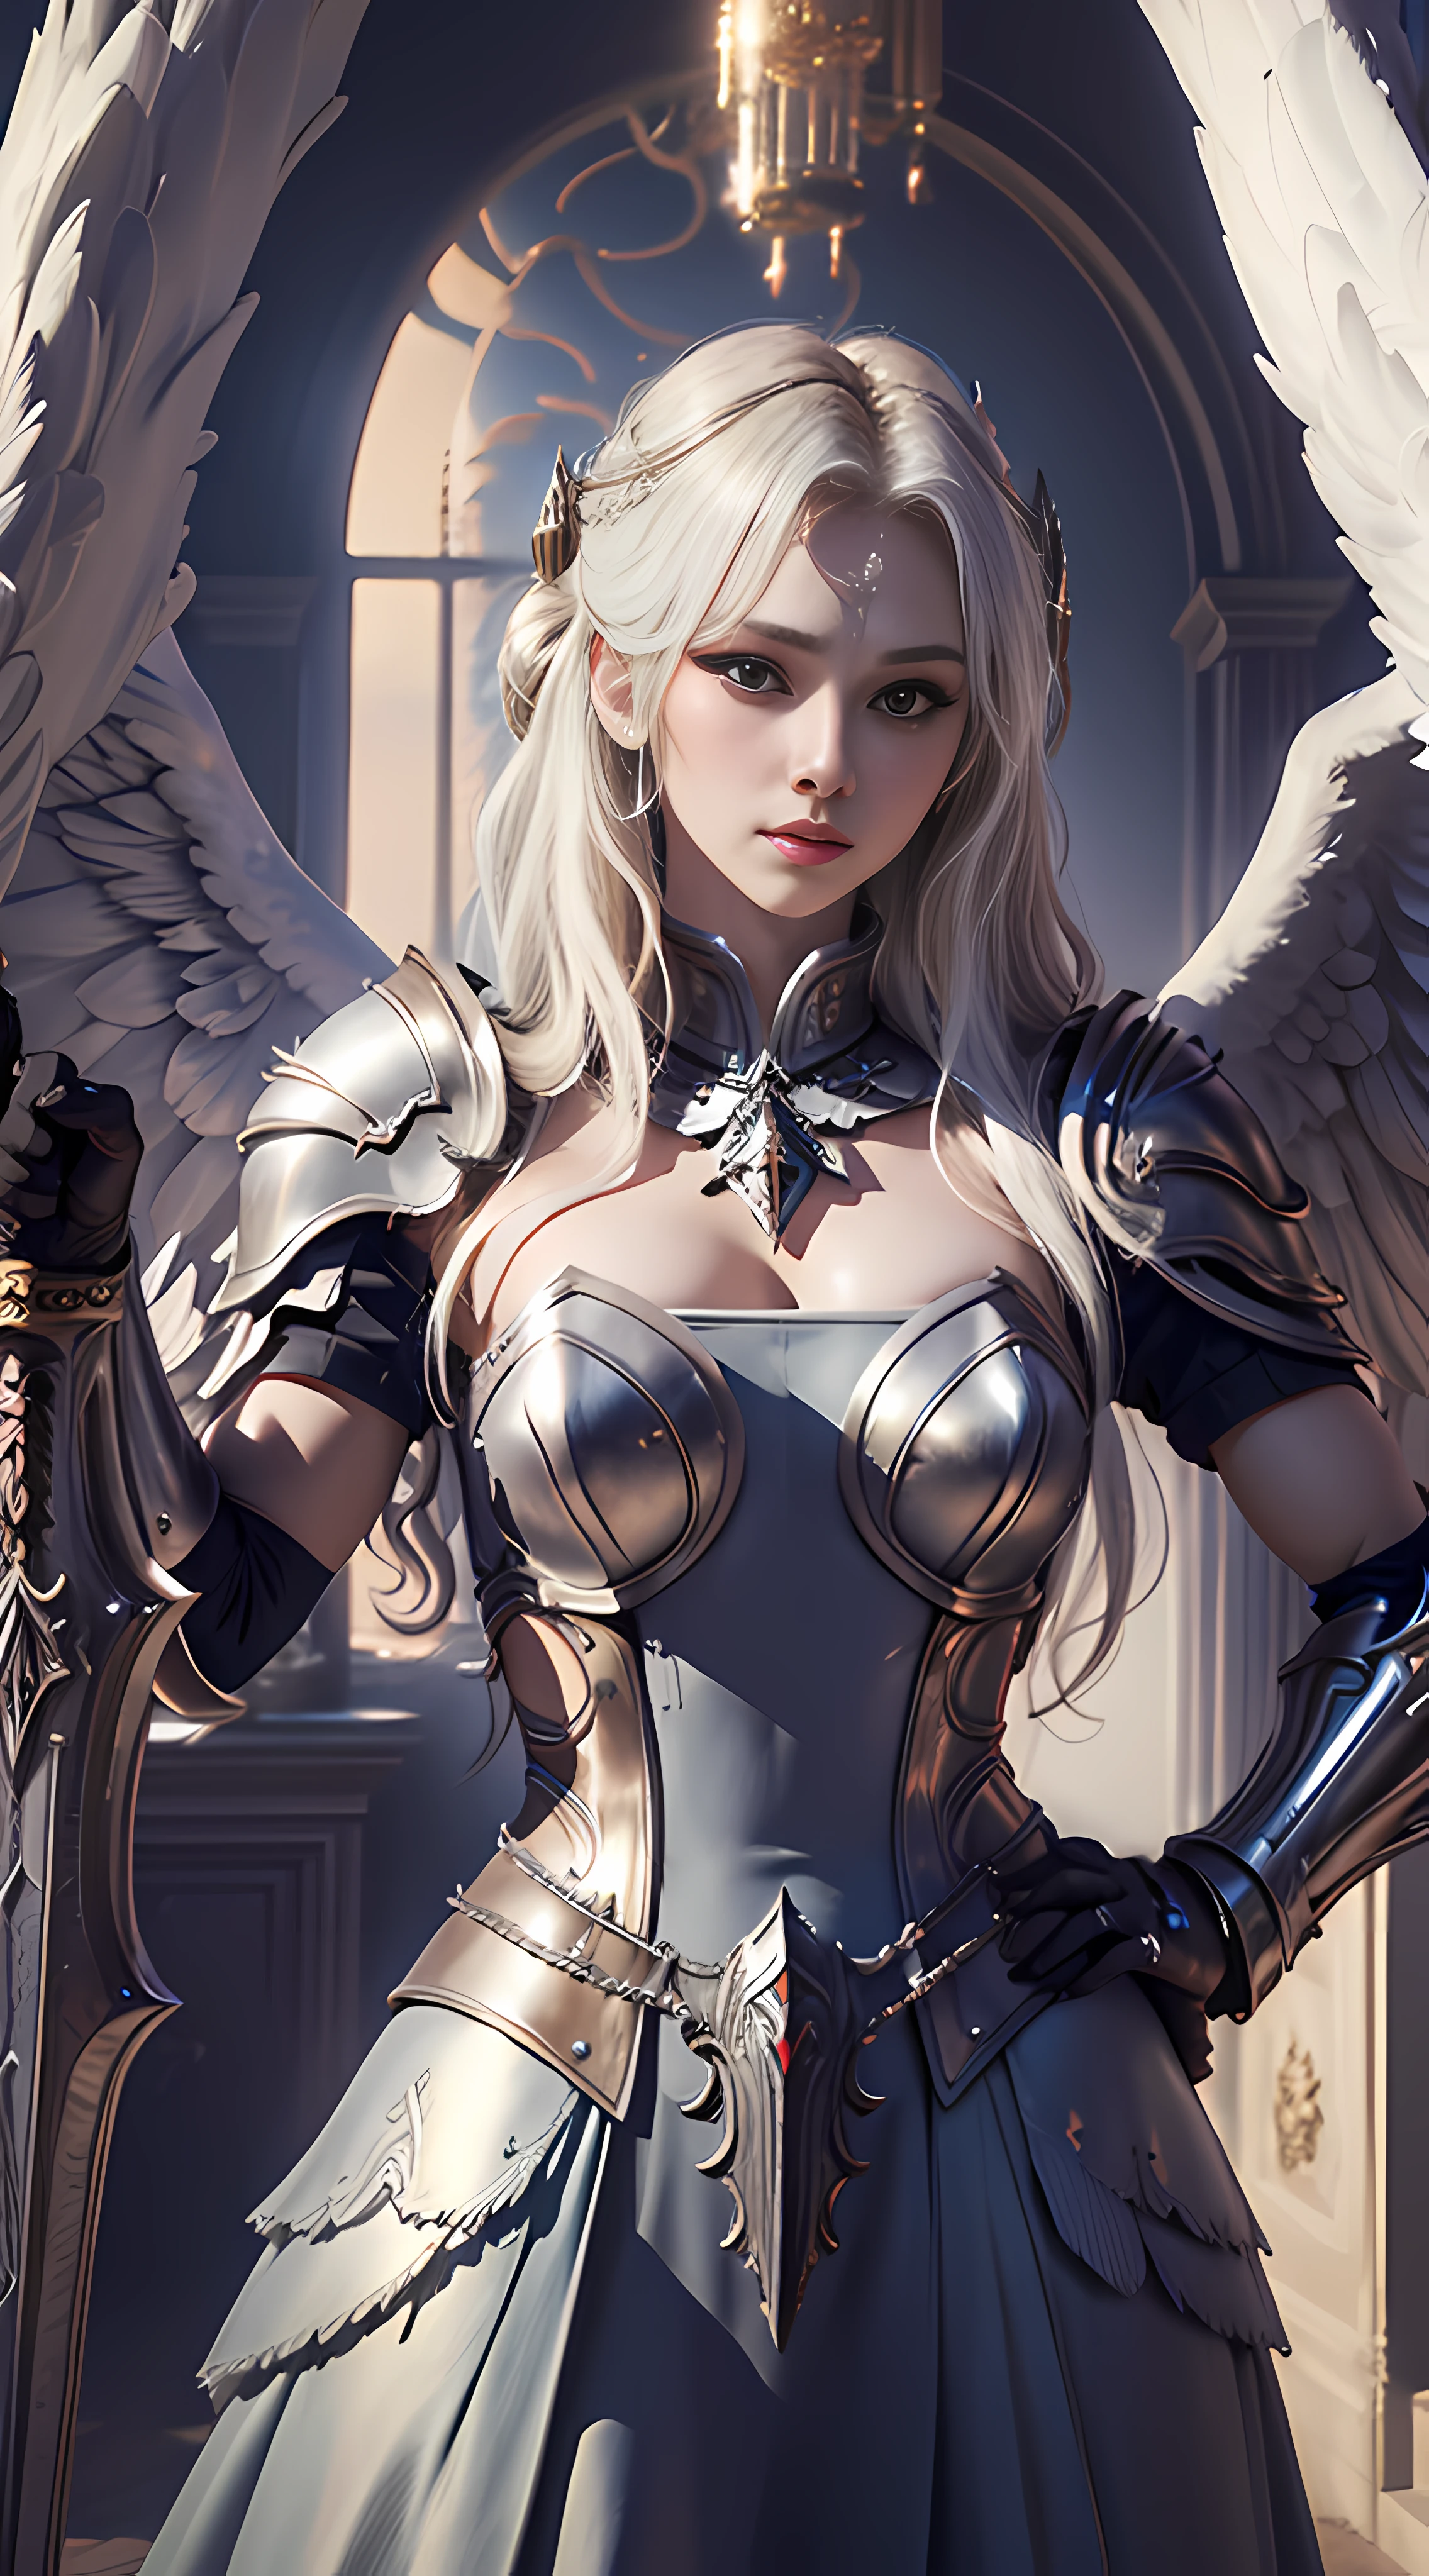 ((Best quality)), ((Masterpiece)), (Detailed),1girll,Solo,full bodyesbian , Valkyrie,angel,Valkyrie armor,Angel wings,winged helmet, woman,gaodanvshen, [sword:Fire:0.3] and [a shield:Ice:0.3],Sword and shield